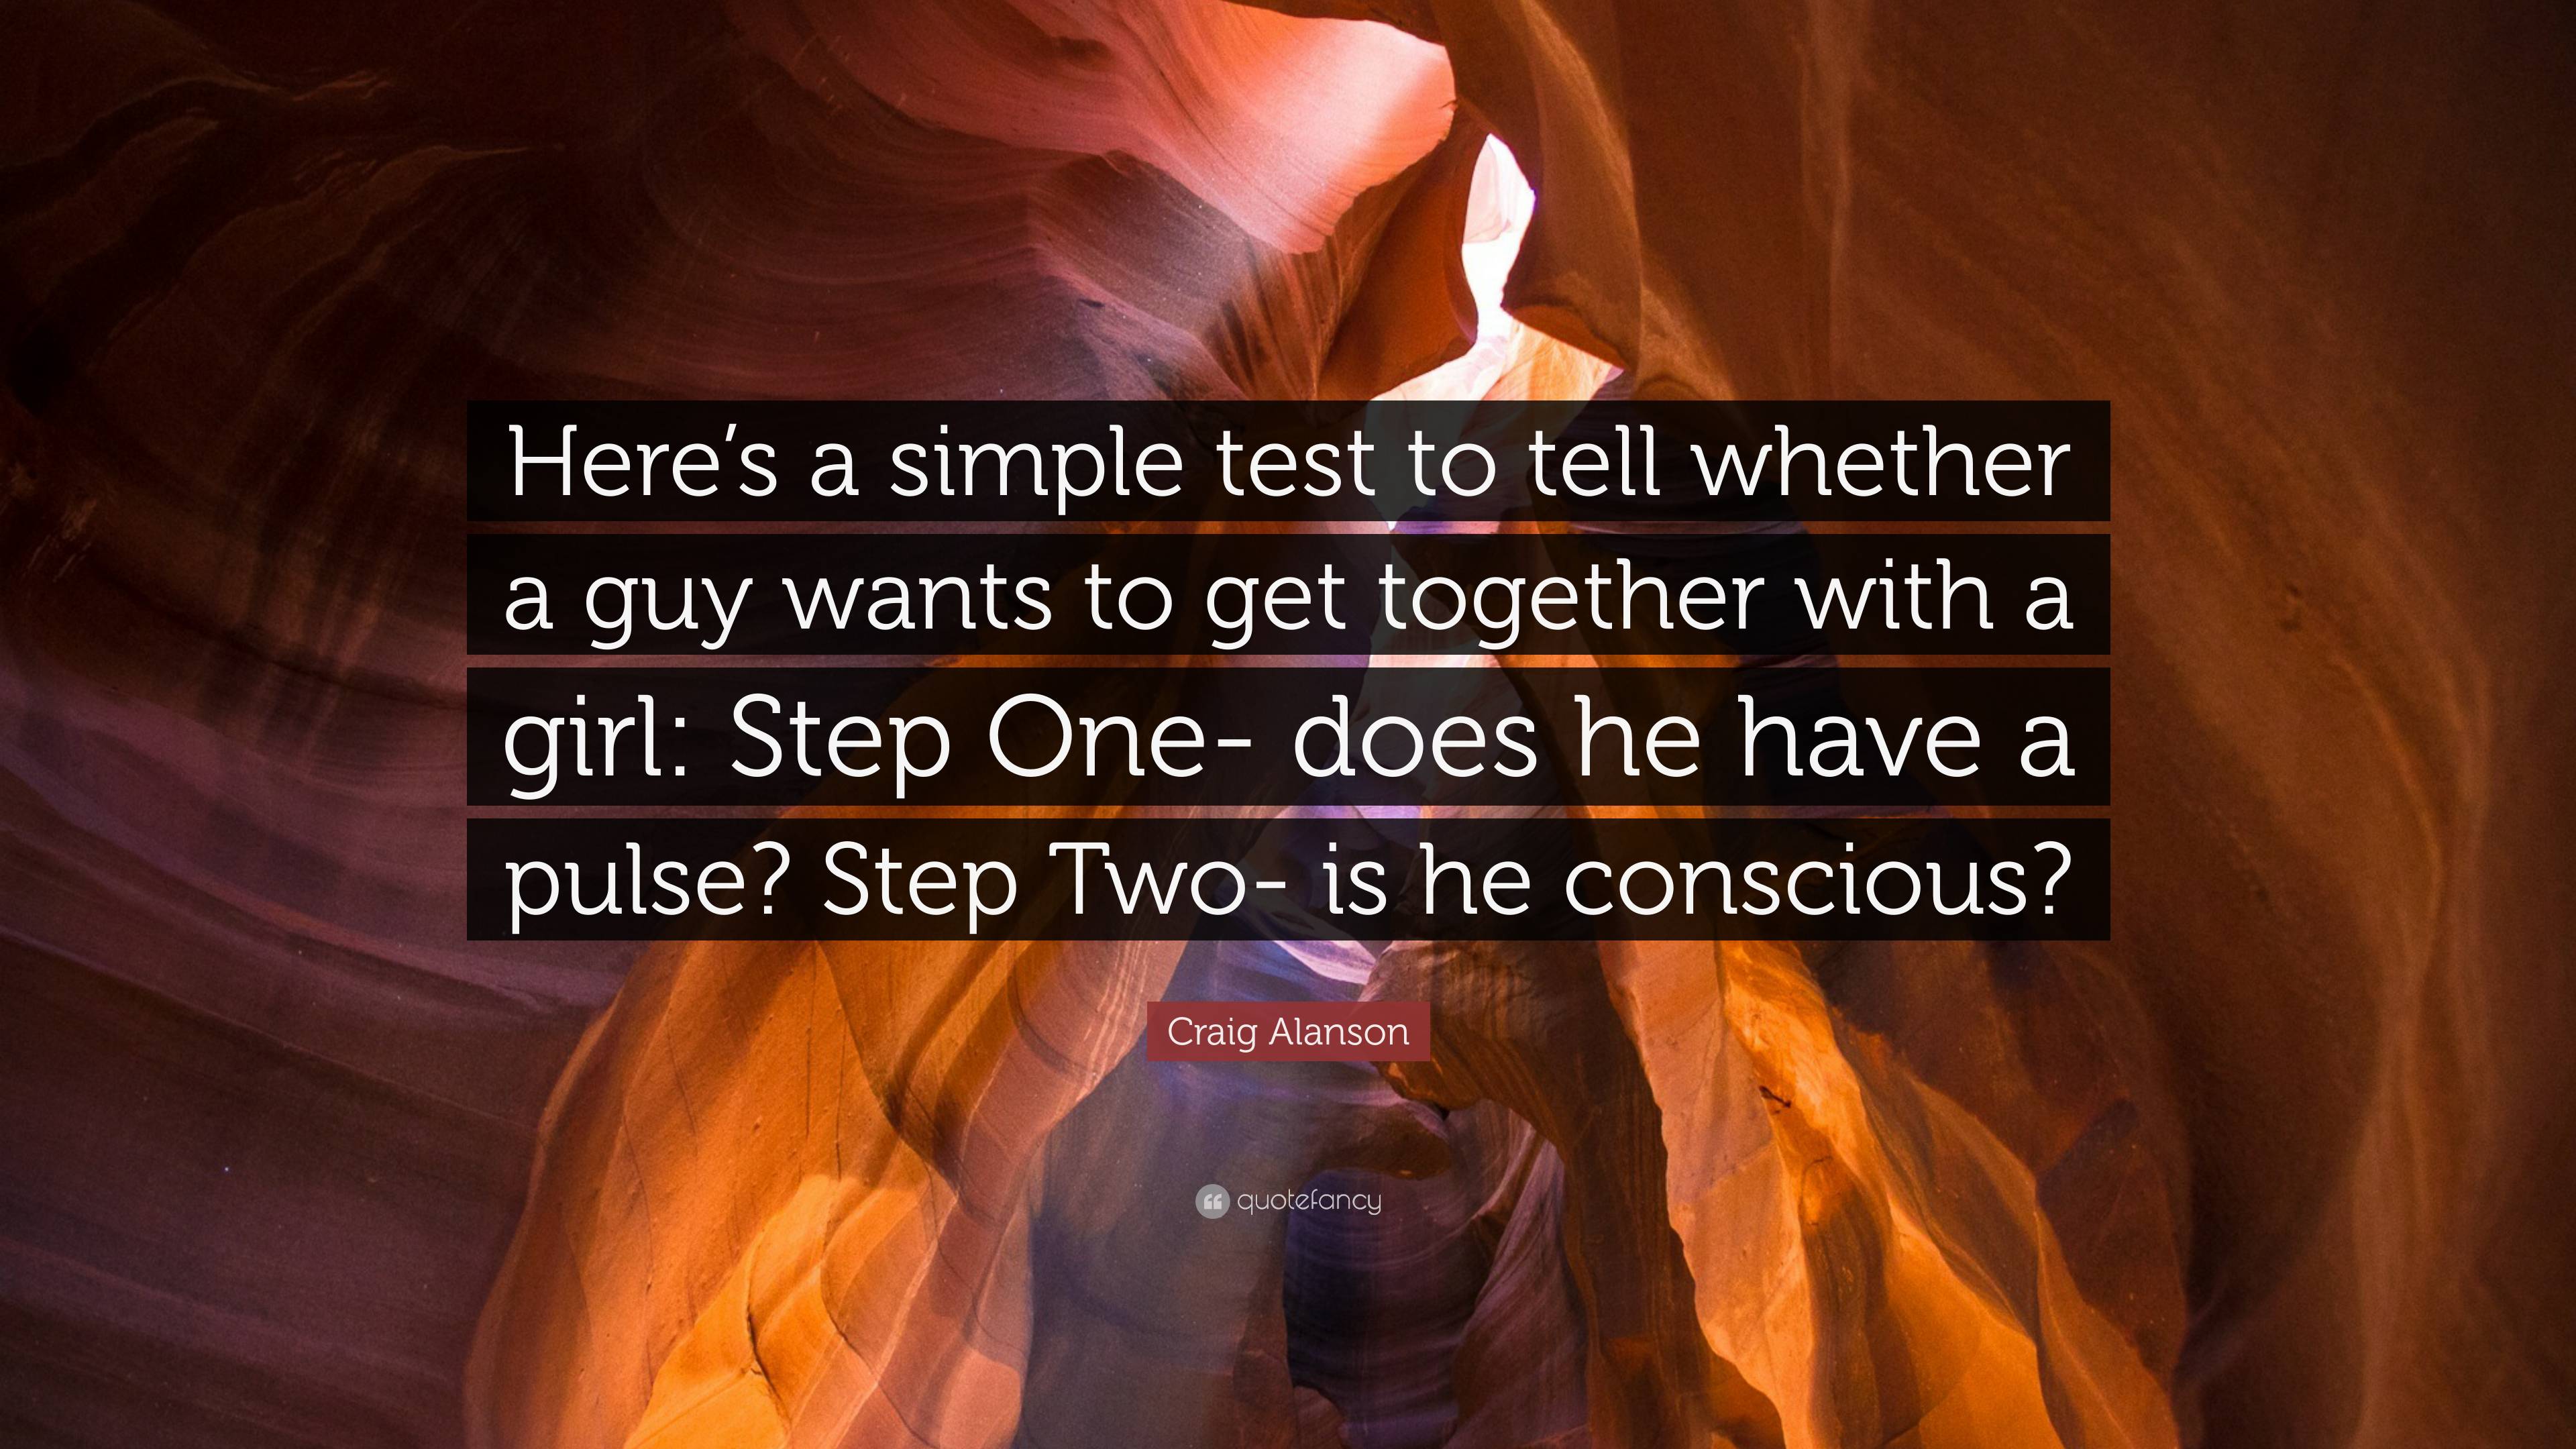 https://quotefancy.com/media/wallpaper/3840x2160/7211819-Craig-Alanson-Quote-Here-s-a-simple-test-to-tell-whether-a-guy.jpg